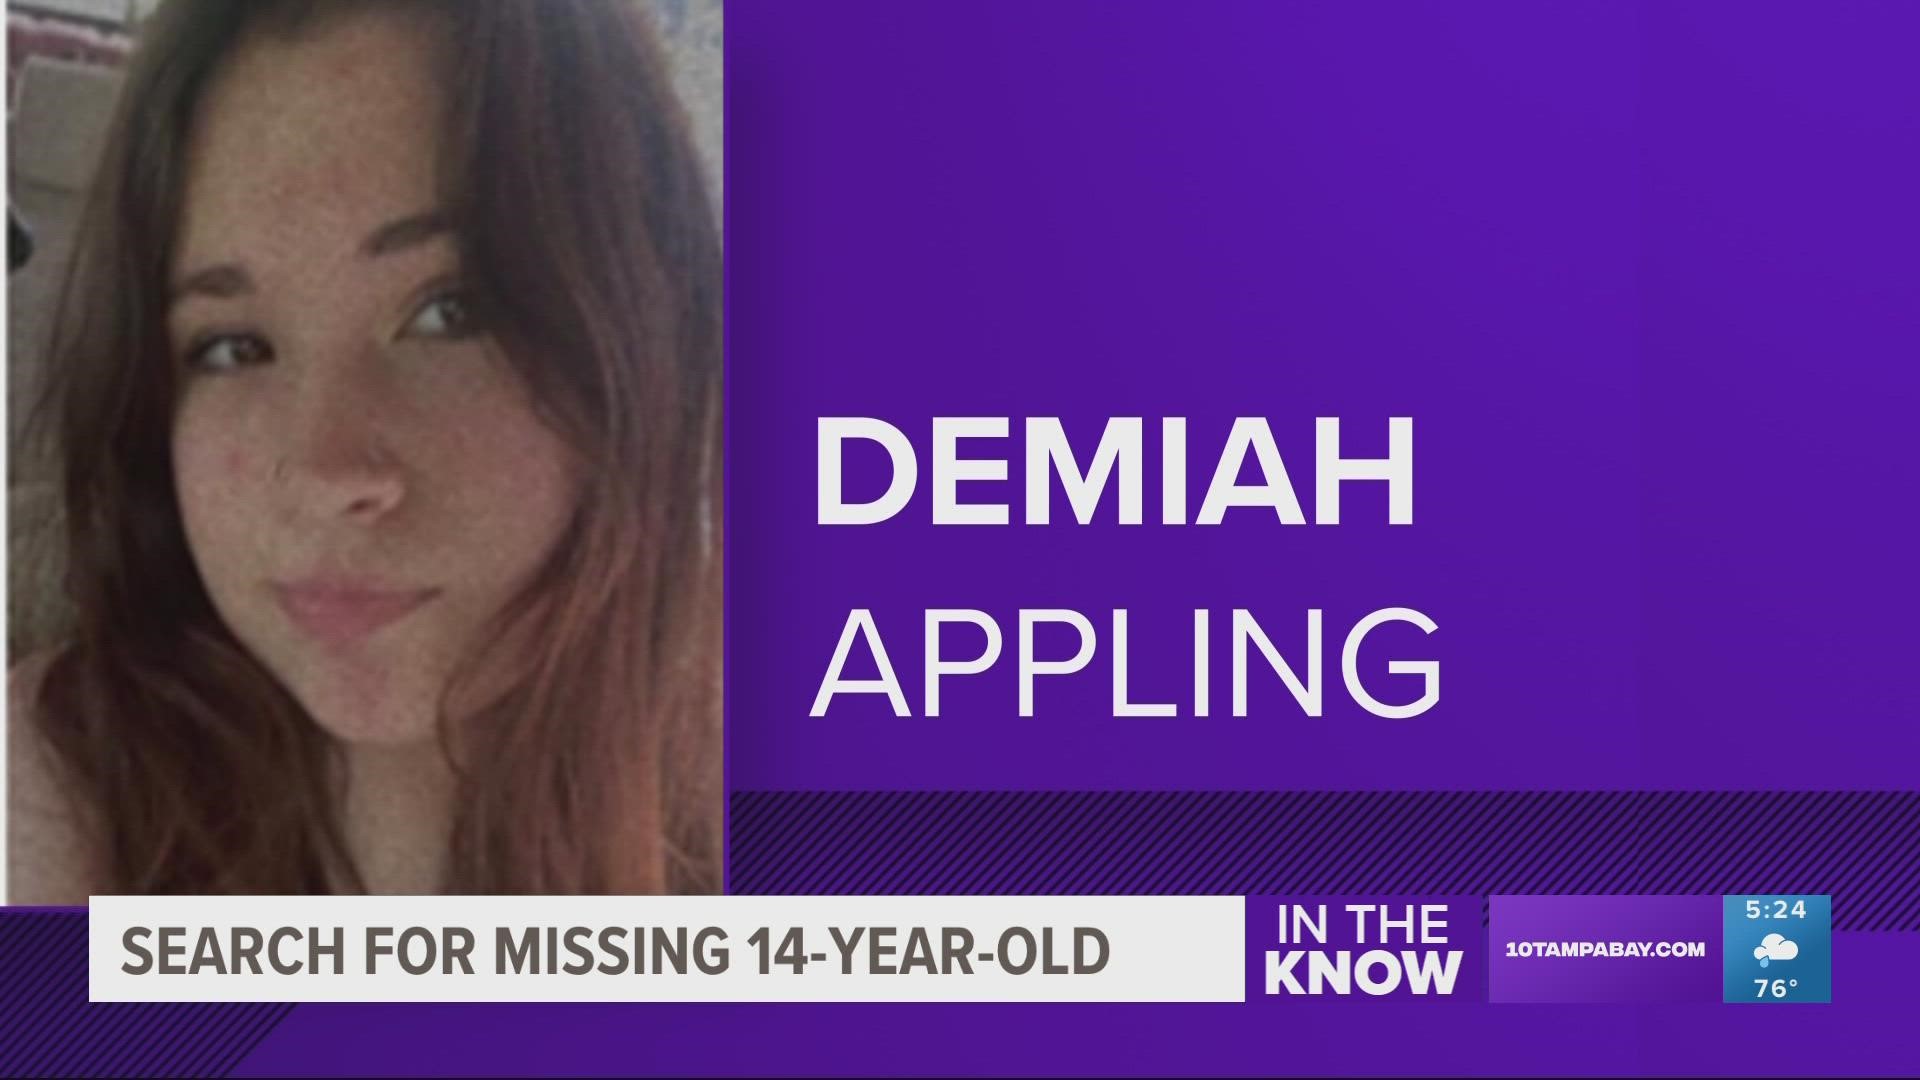 She was last seen on Oct. 16.